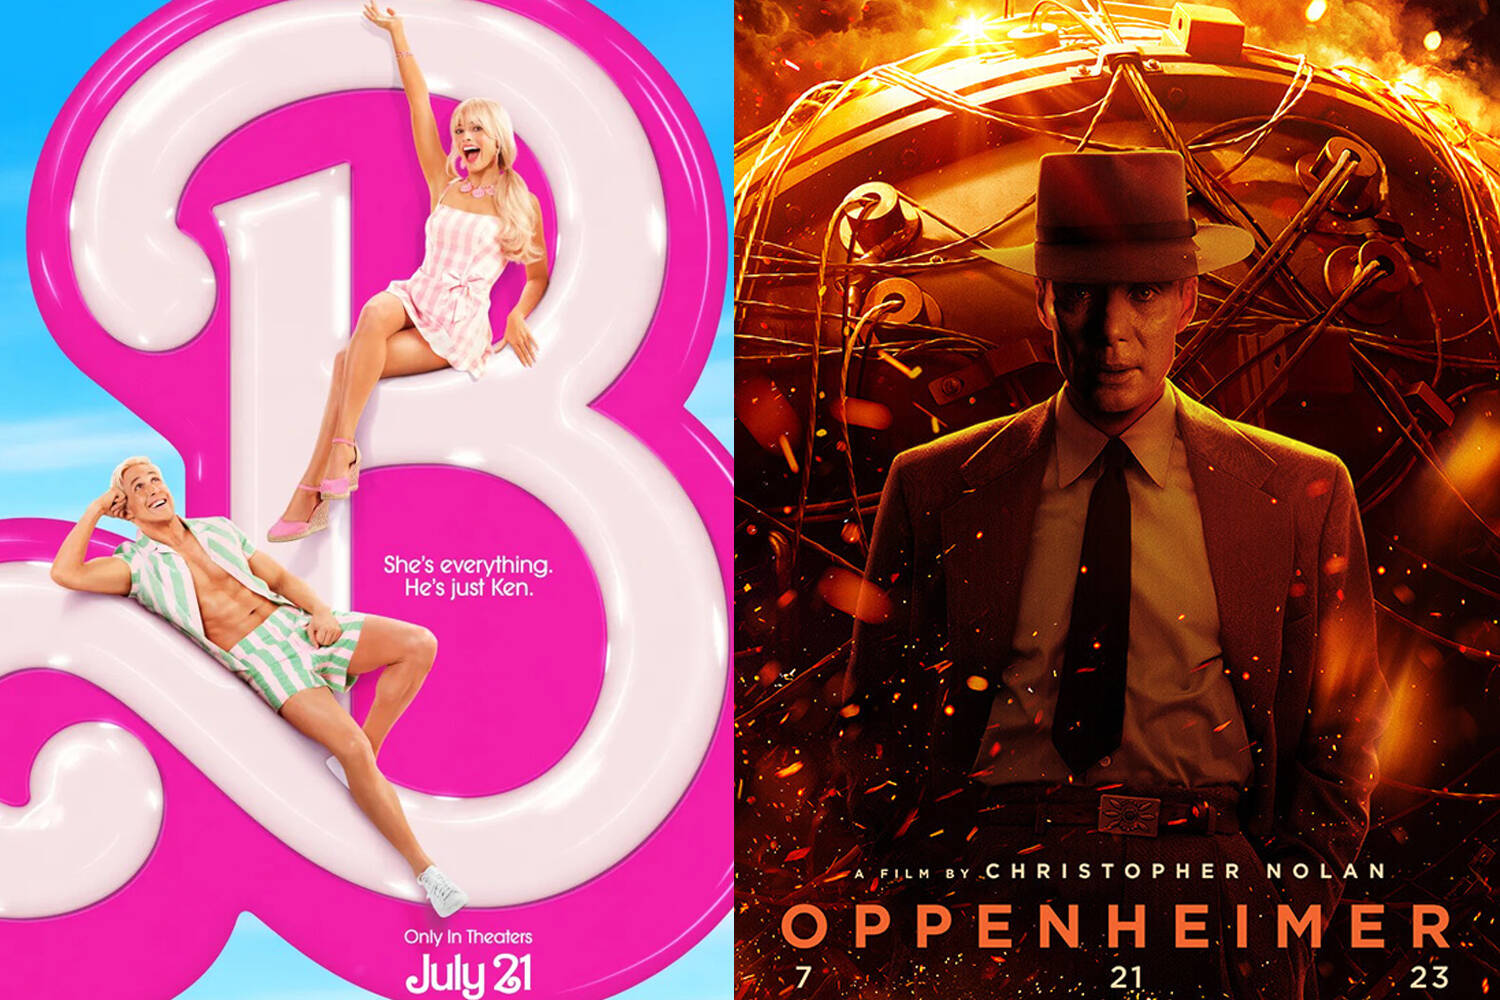 Promotional material for both “Barbie” and “Oppenheimer.” (Photos courtesy WarnerMedia and Universal Pictues)